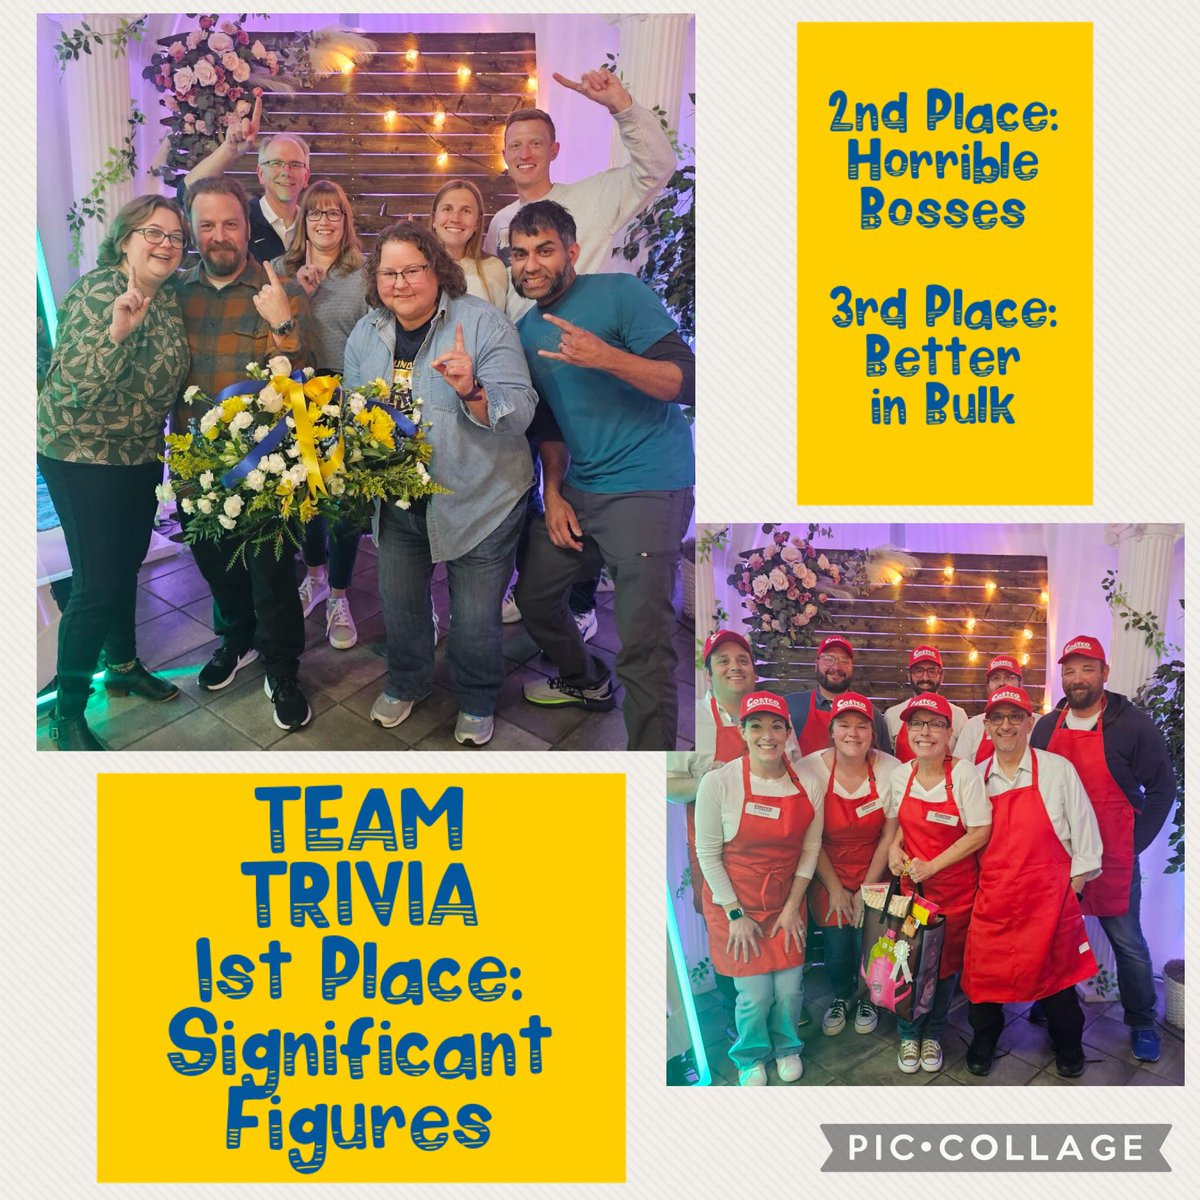 Drum roll please! 🥁🥁🥁 We are excited to announce the winners of our team trivia fundraiser this past Saturday night! Congratulations to team captain Coach Lewis, SIGNIFICANT FIGURES finished in 1ST PLACE! 2nd PLACE: HORRIBLE BOSSES 3rd Place: BETTER IN BULK from JTMMS